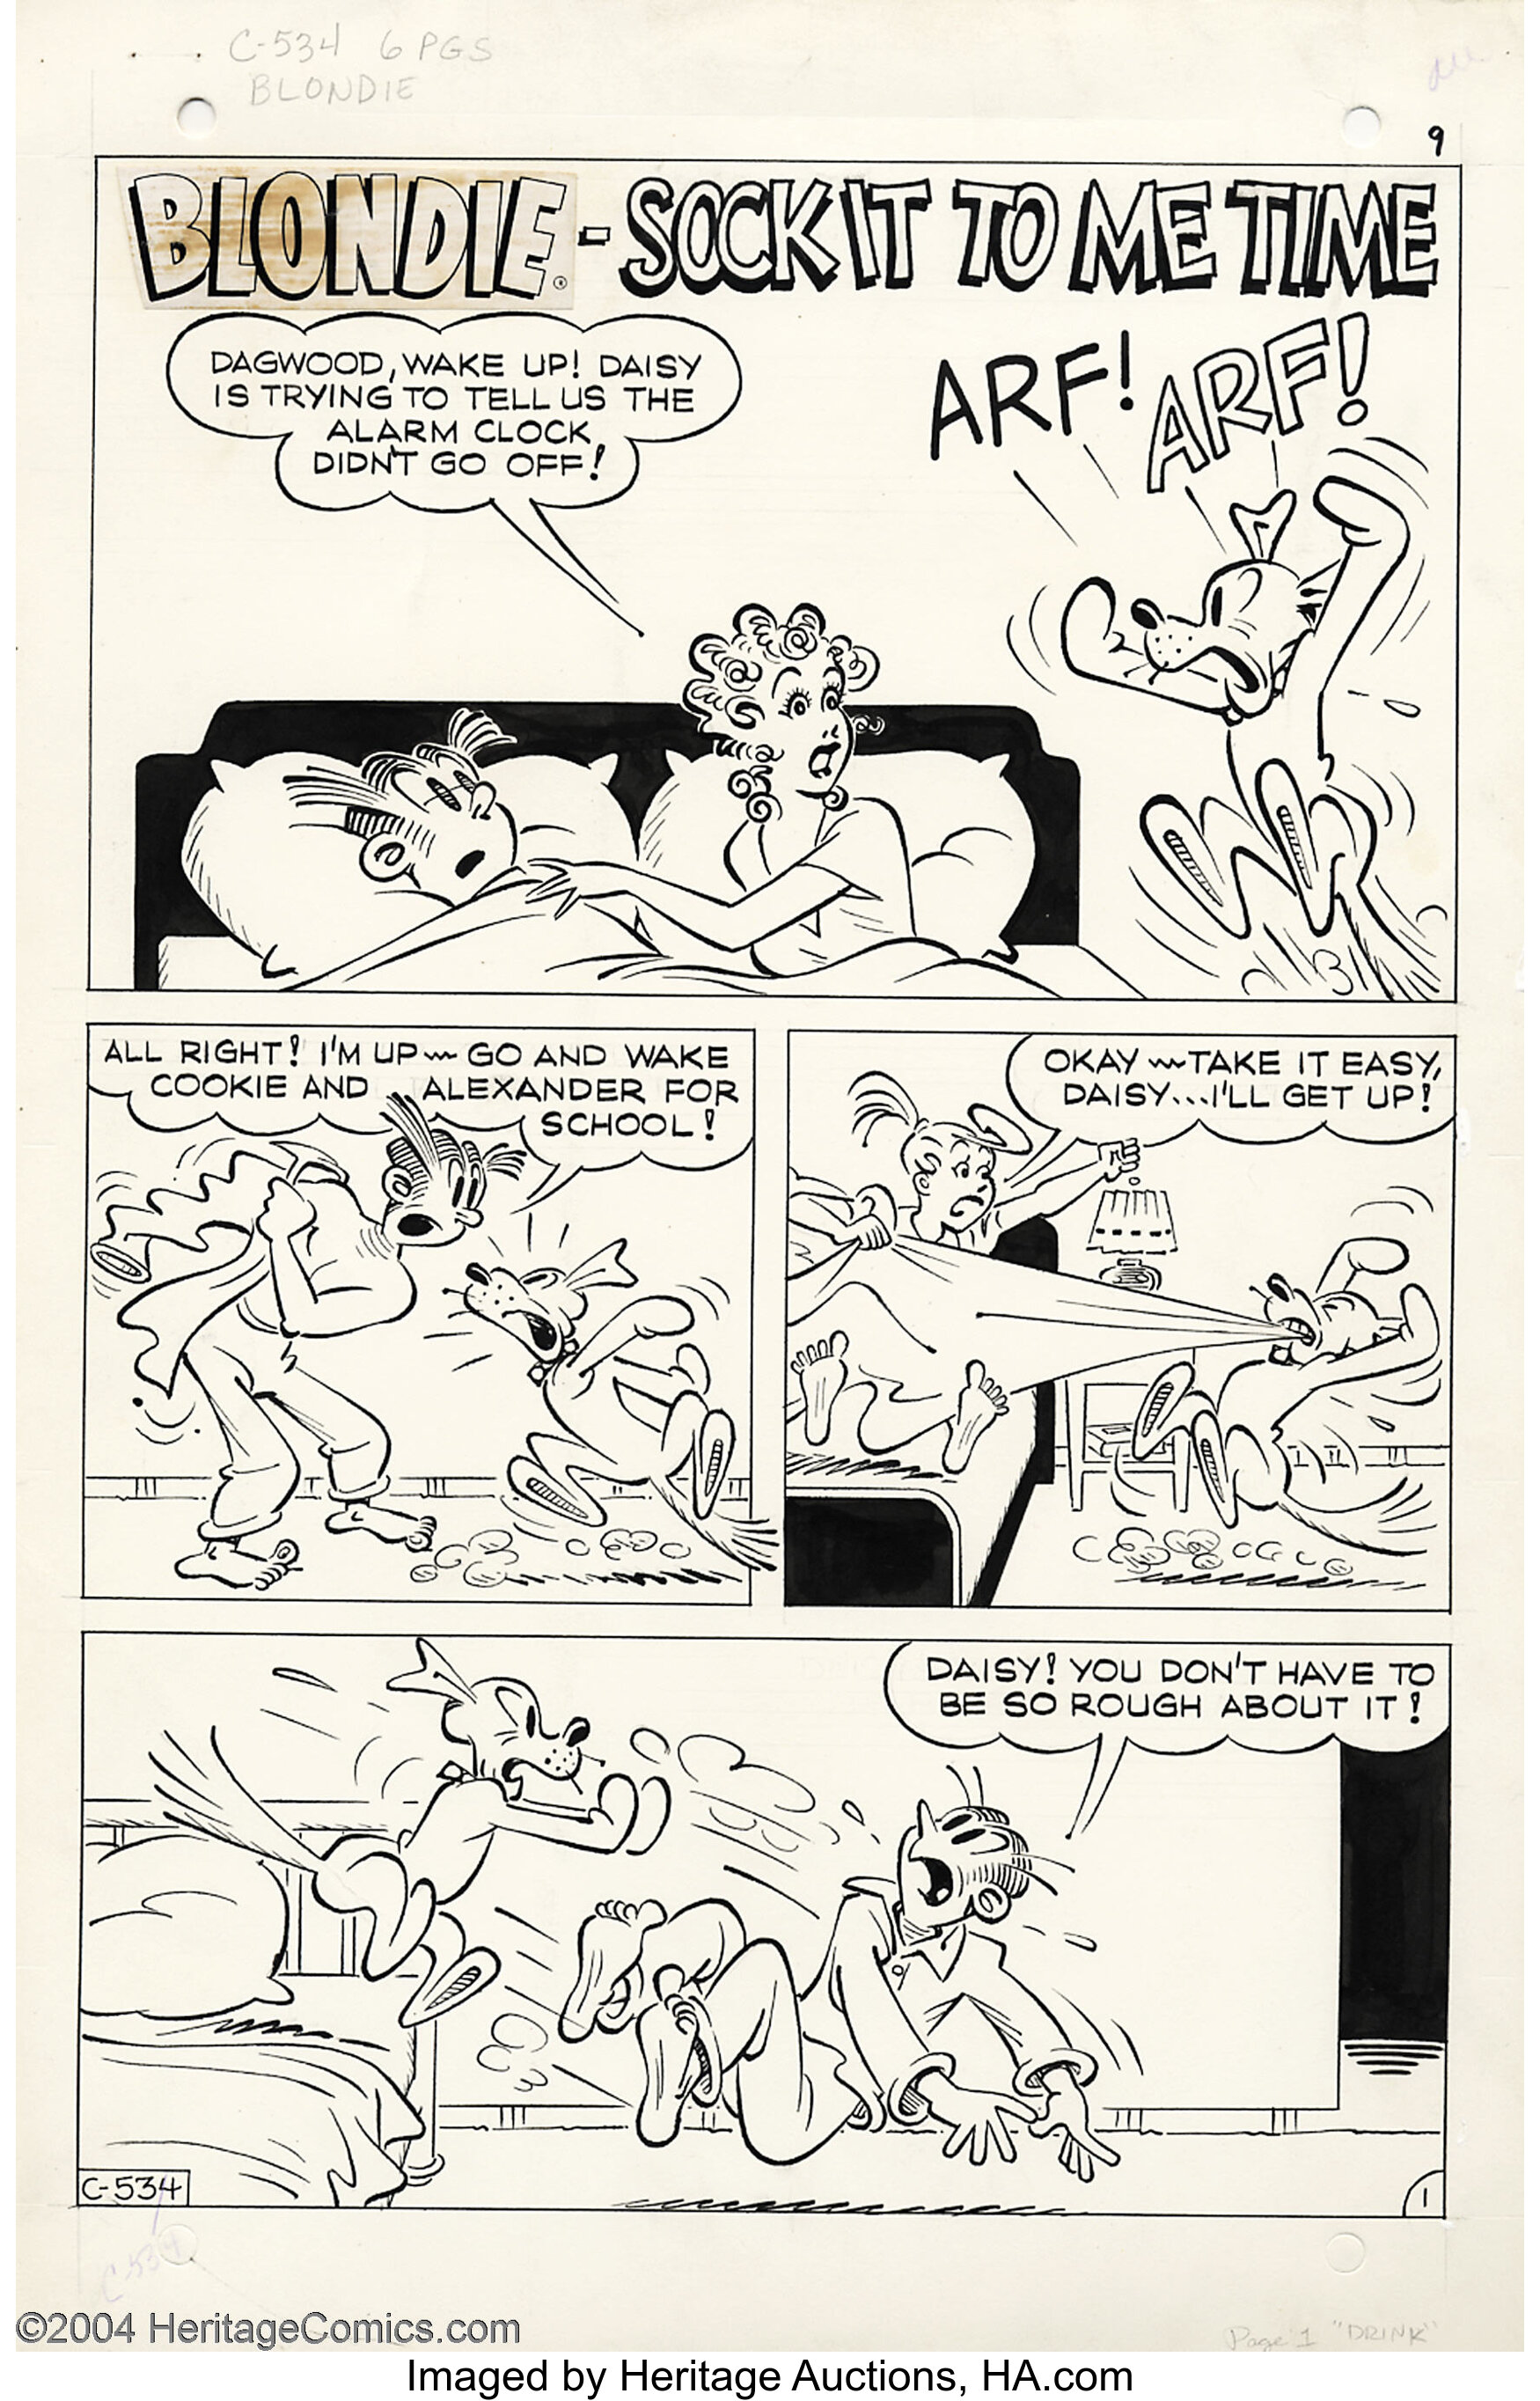 Hy Eisman - Original Art for Blondie, Complete 6-Page Story, 